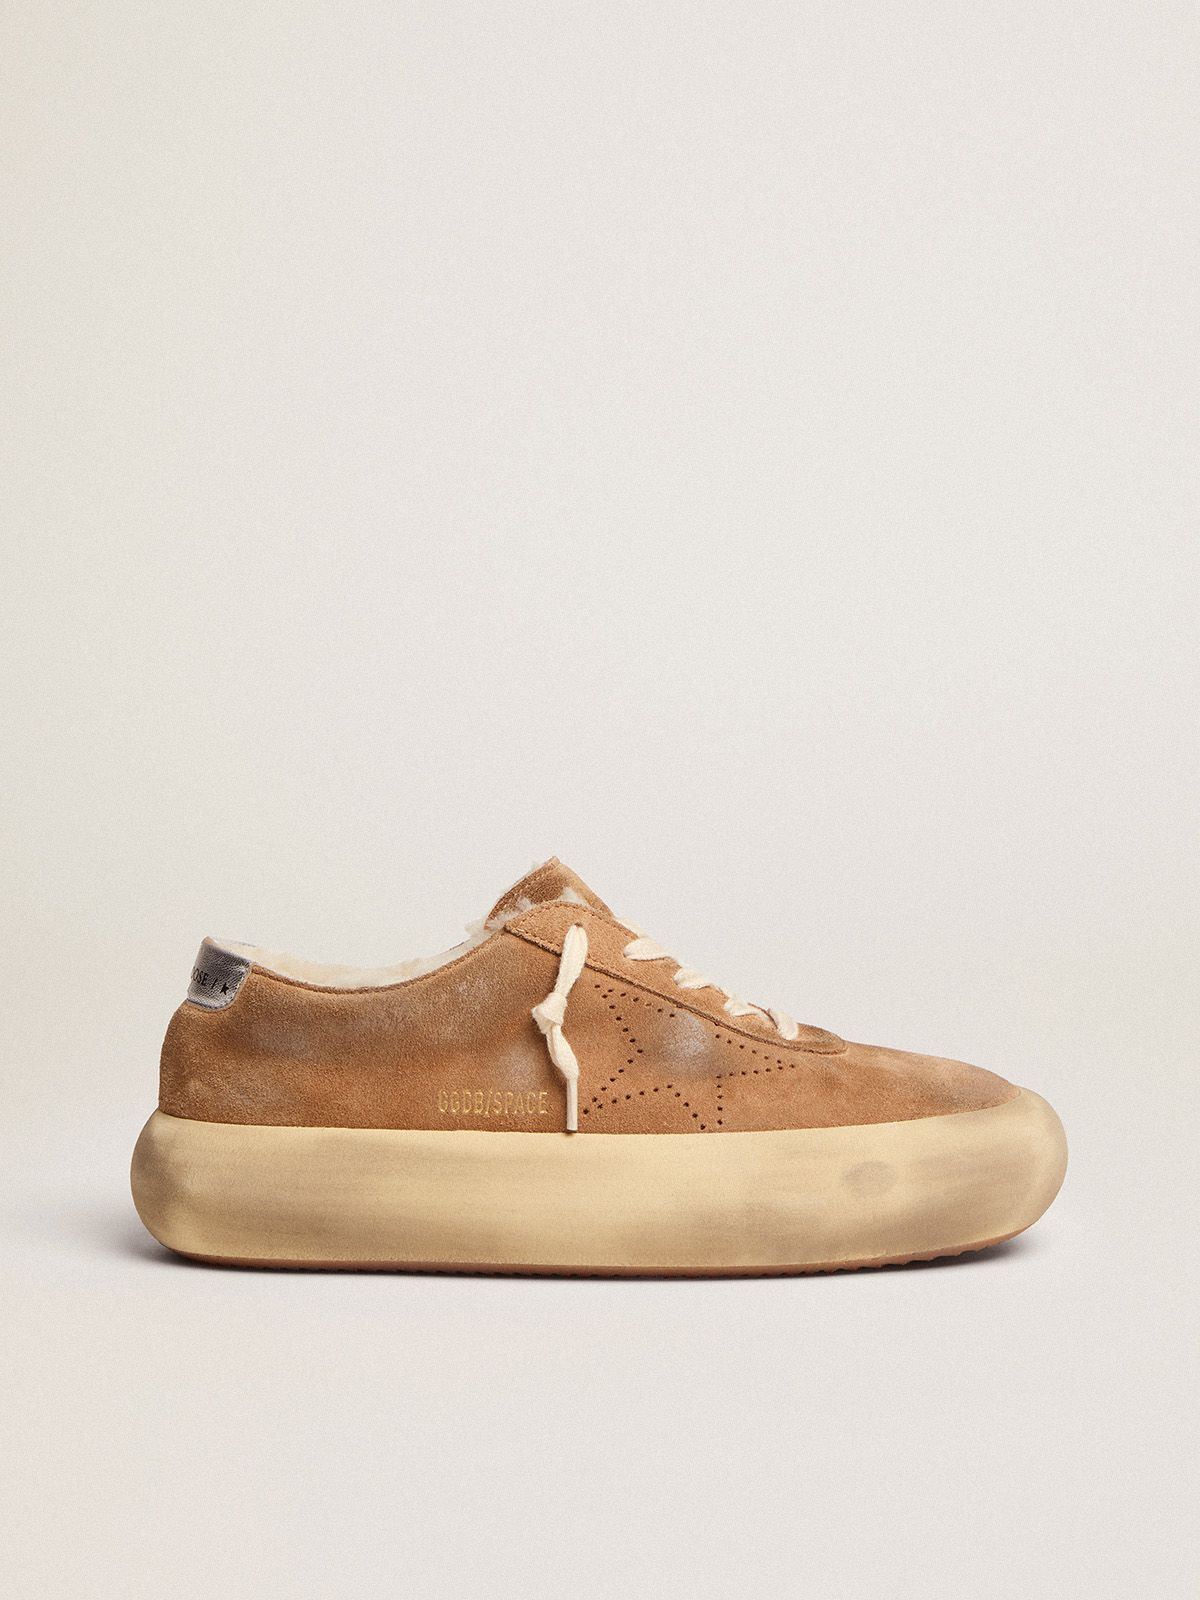 golden goose suede shoes Space-Star with lining shearling tobacco-colored in